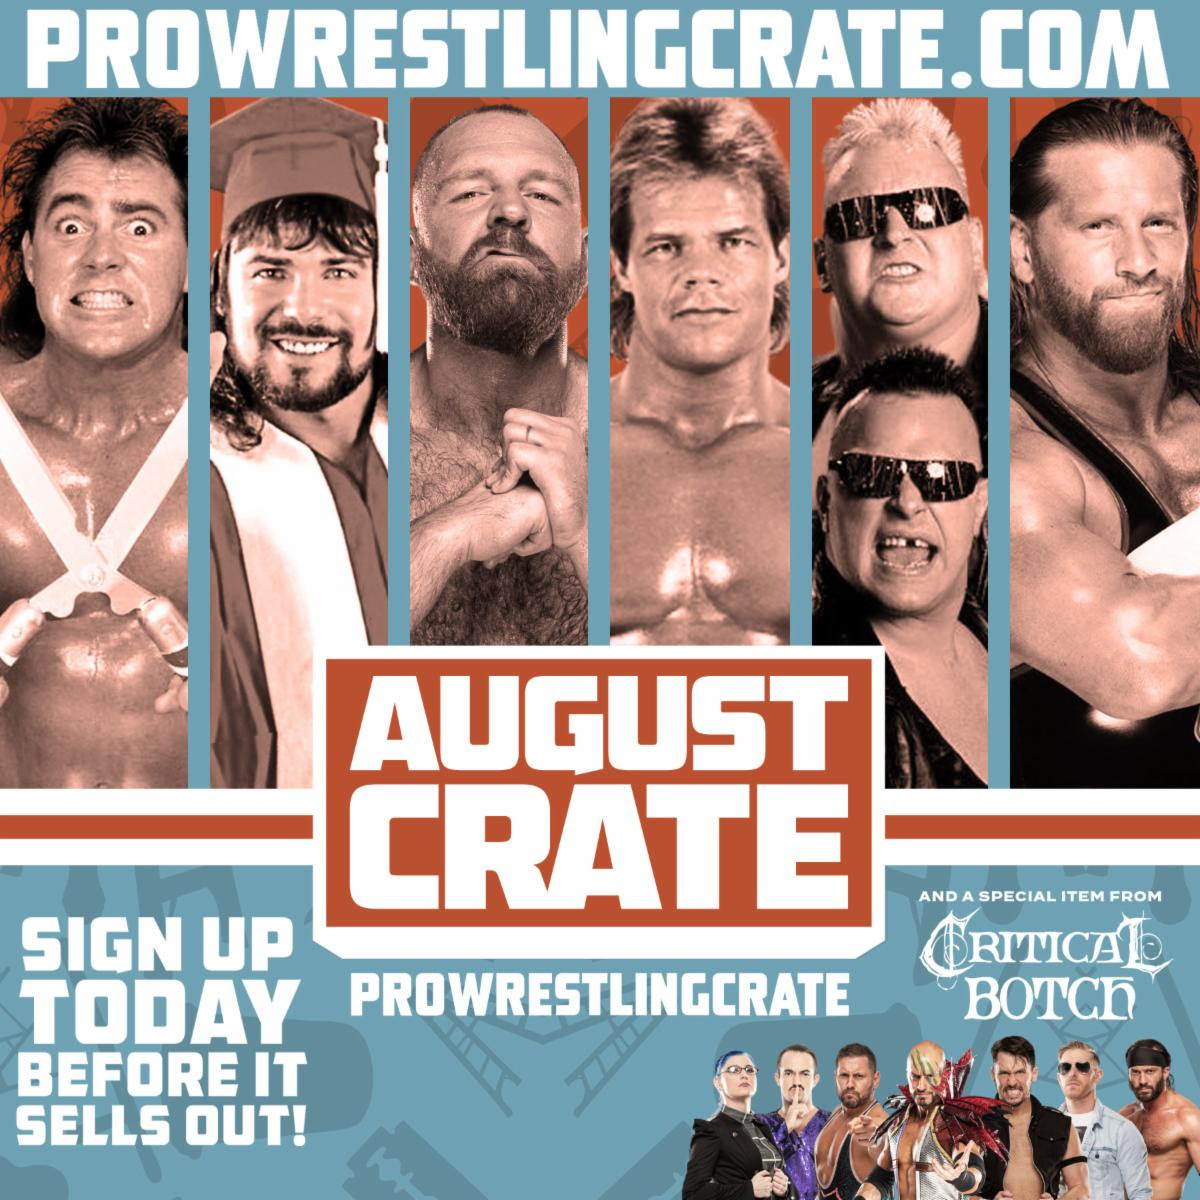 PROWRESTLINGCRATE.COM | AUGUST CRATE | SIGN UP TODAY BEFORE IT SELLS OUT! | AND A SPECIAL ITEM FROM CRITICAL BOTCH